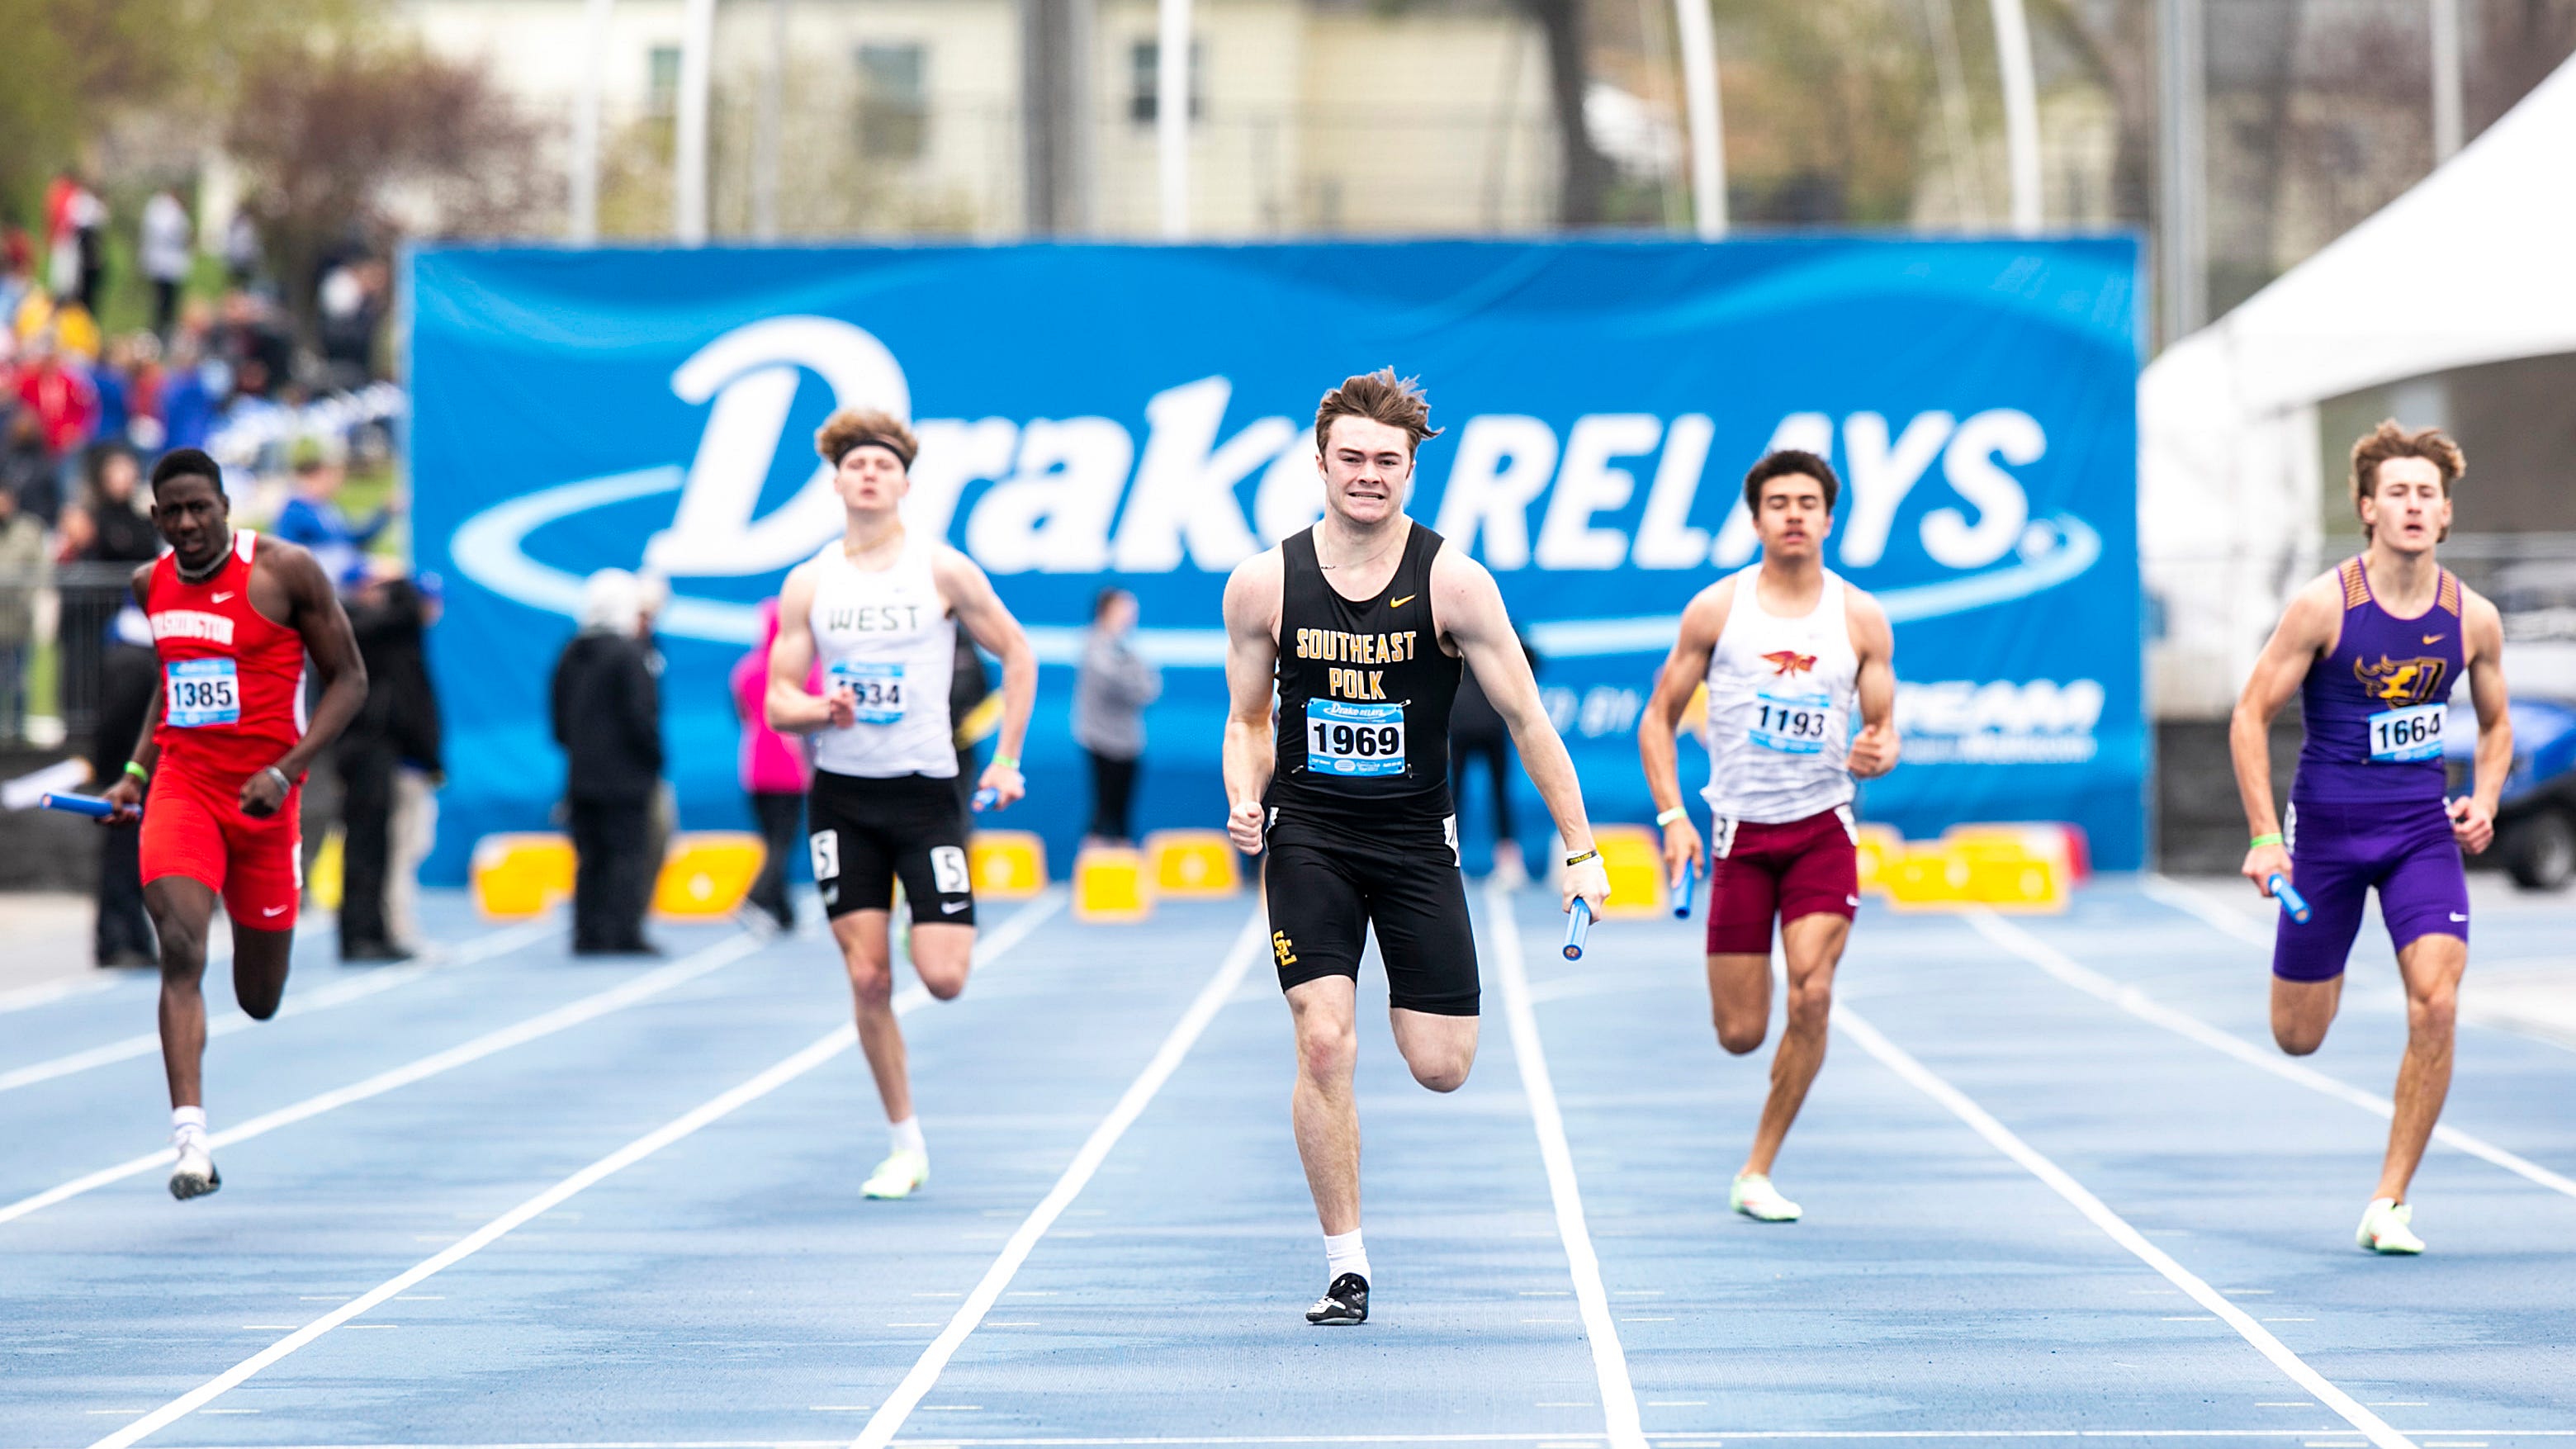 Results, analysis of 2022 Drake Relay Saturday events